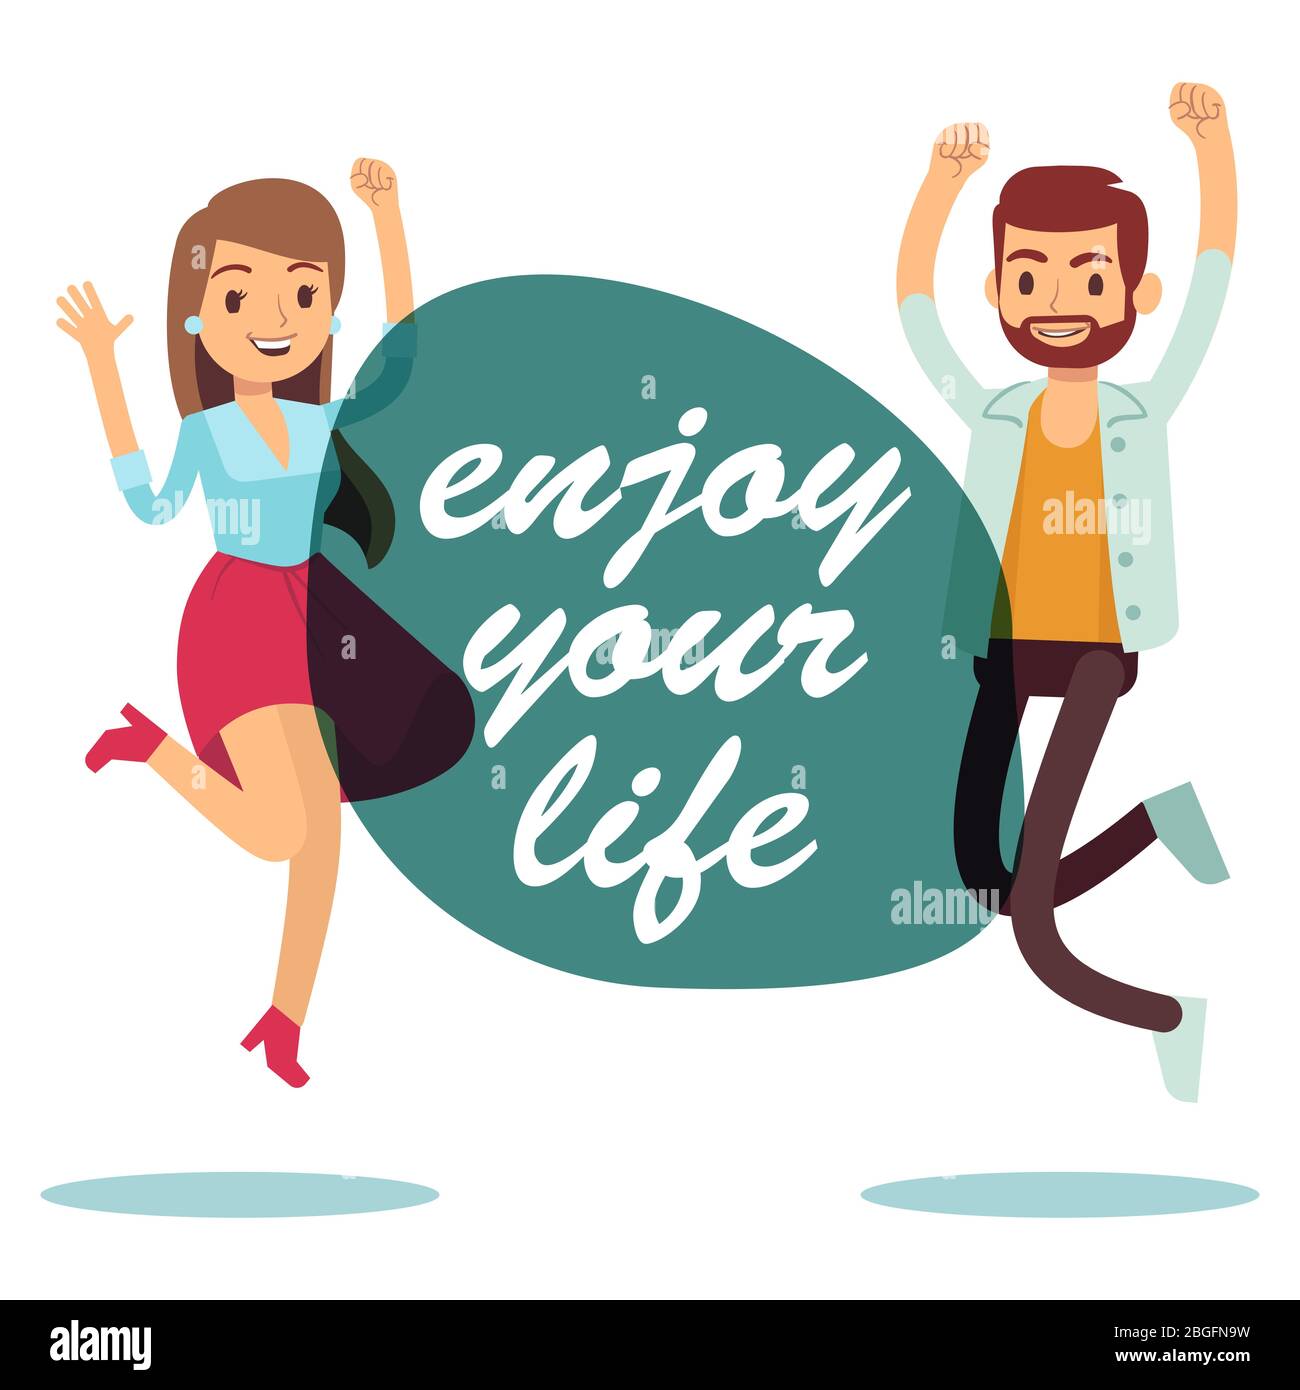 Enjoy Your Life Royalty Free SVG, Cliparts, Vectors, and Stock  Illustration. Image 115990486.